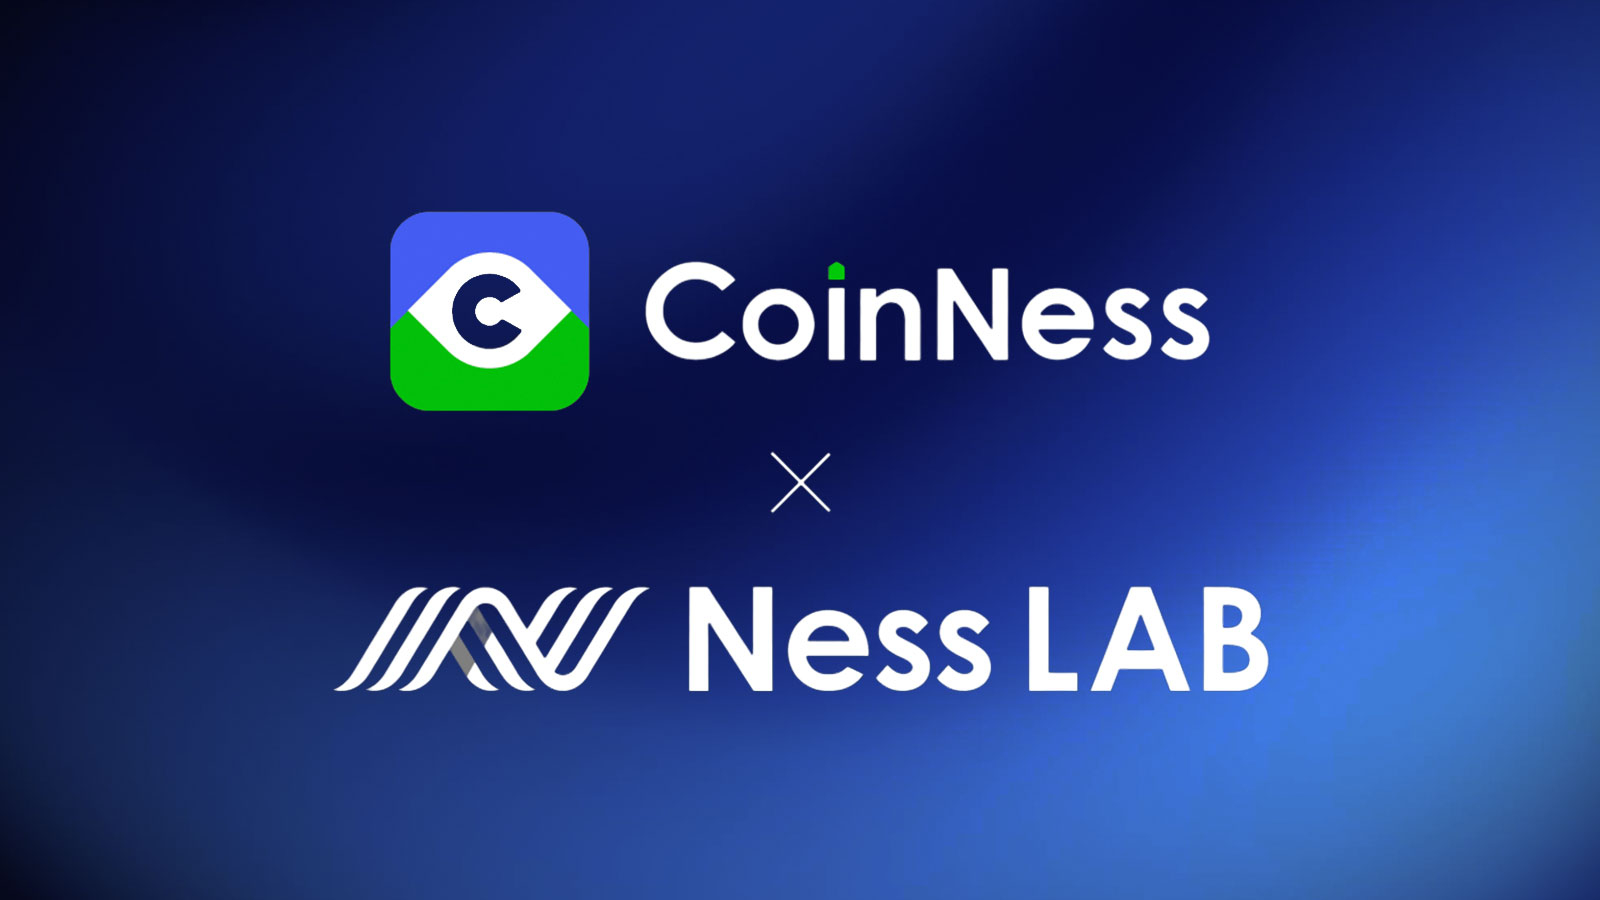 CoinNess partners with Ness LAB to drive next-generation Web3 and Blockchain initiatives